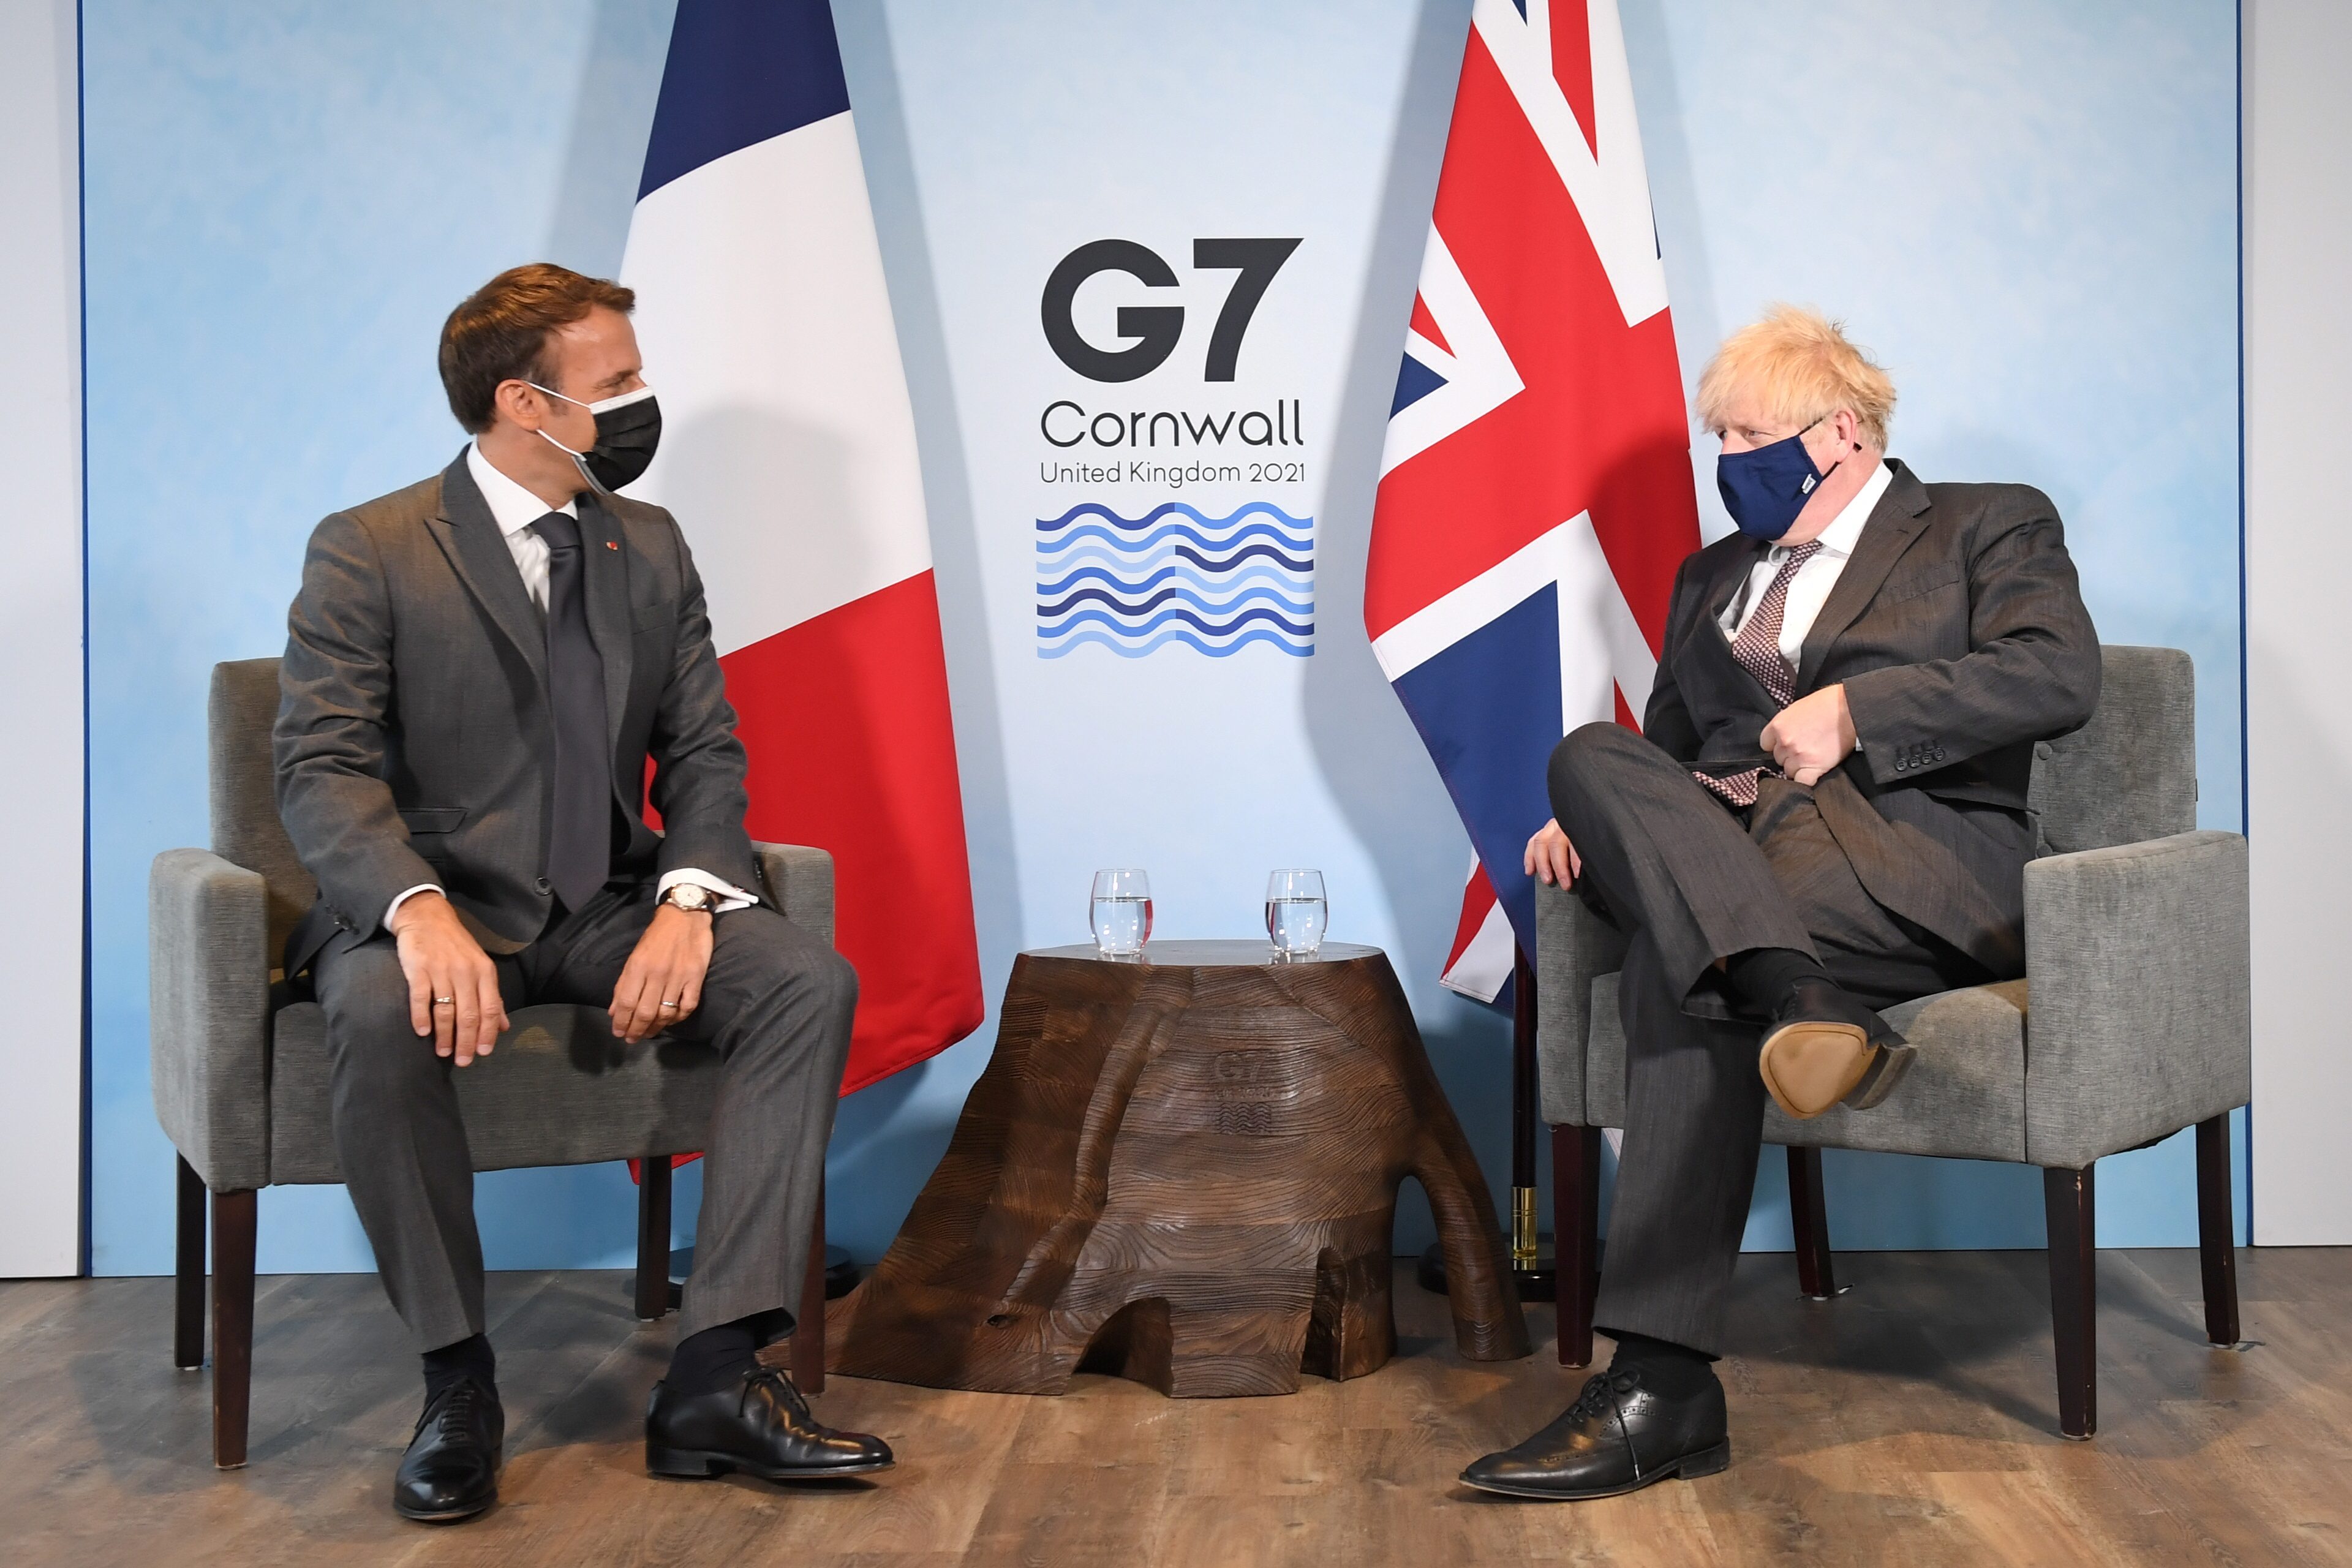 Macron offers UK’s Johnson: ‘Le reset’ if he keeps his Brexit word